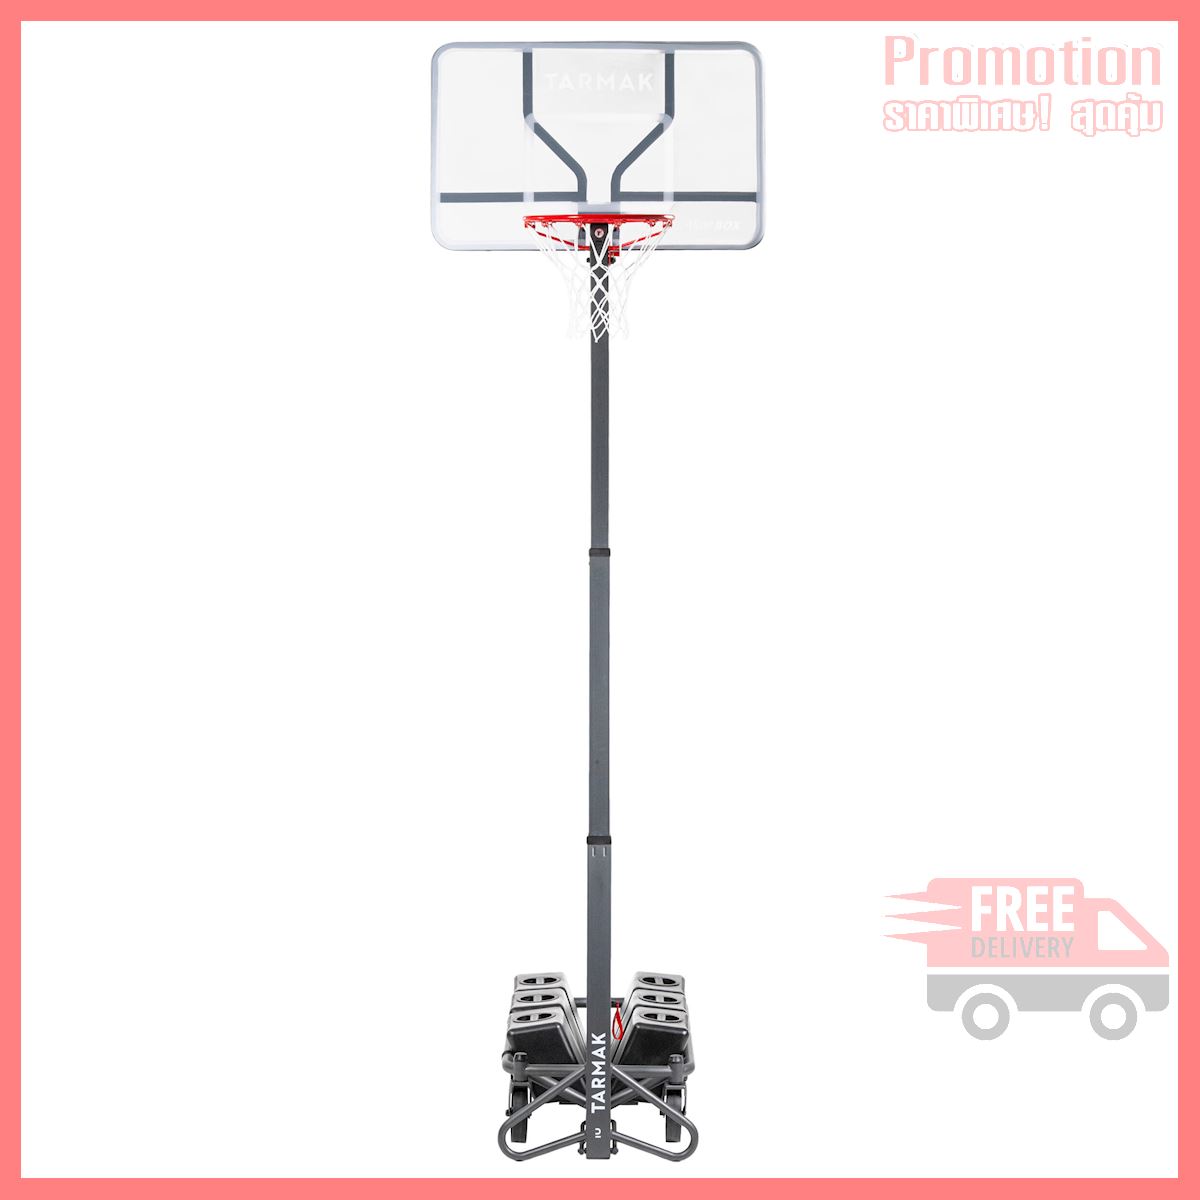 Kids'/Adult Basketball Hoop B500.2.4m to 3.05m. Sets up and stores in 1 minutes